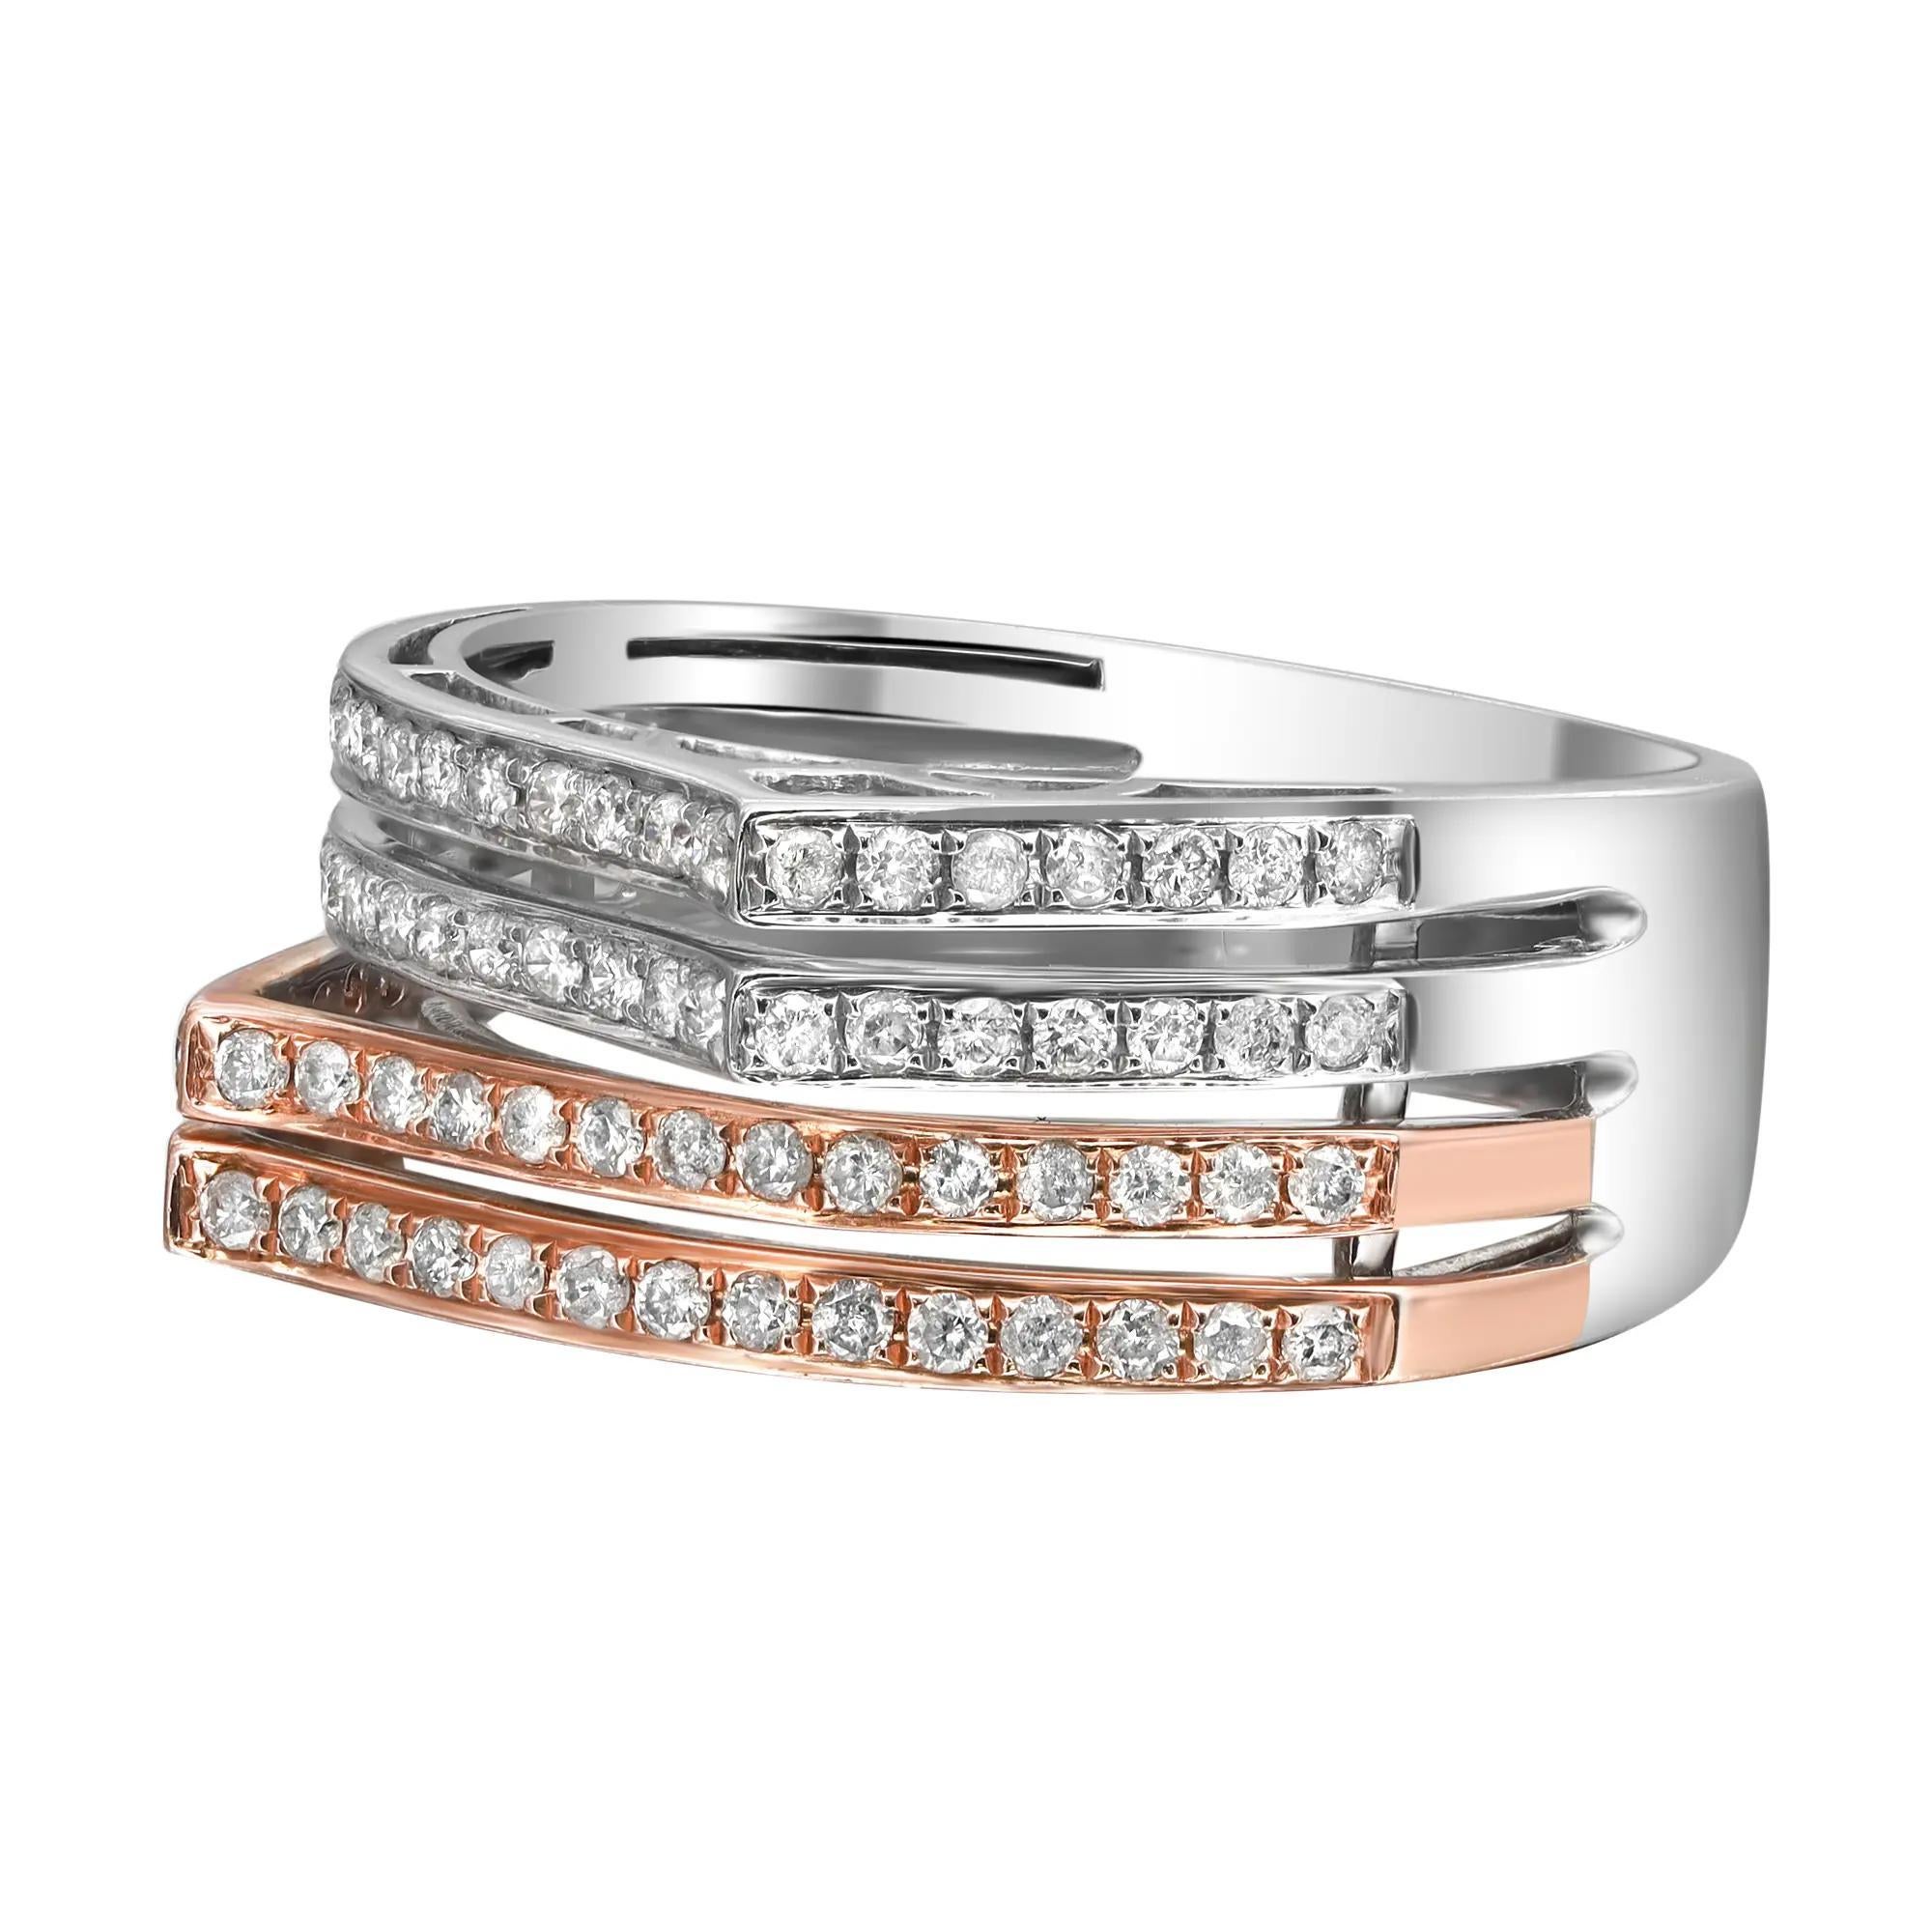 This elegant and classic two tone diamond band ring is crafted in 14k white and rose gold. Features four rows of pave set round brilliant cut diamonds weighing 0.56 carat. Ring width: 9mm. Ring size: 7.5. Total weight: 6.07 grams. Perfect addition